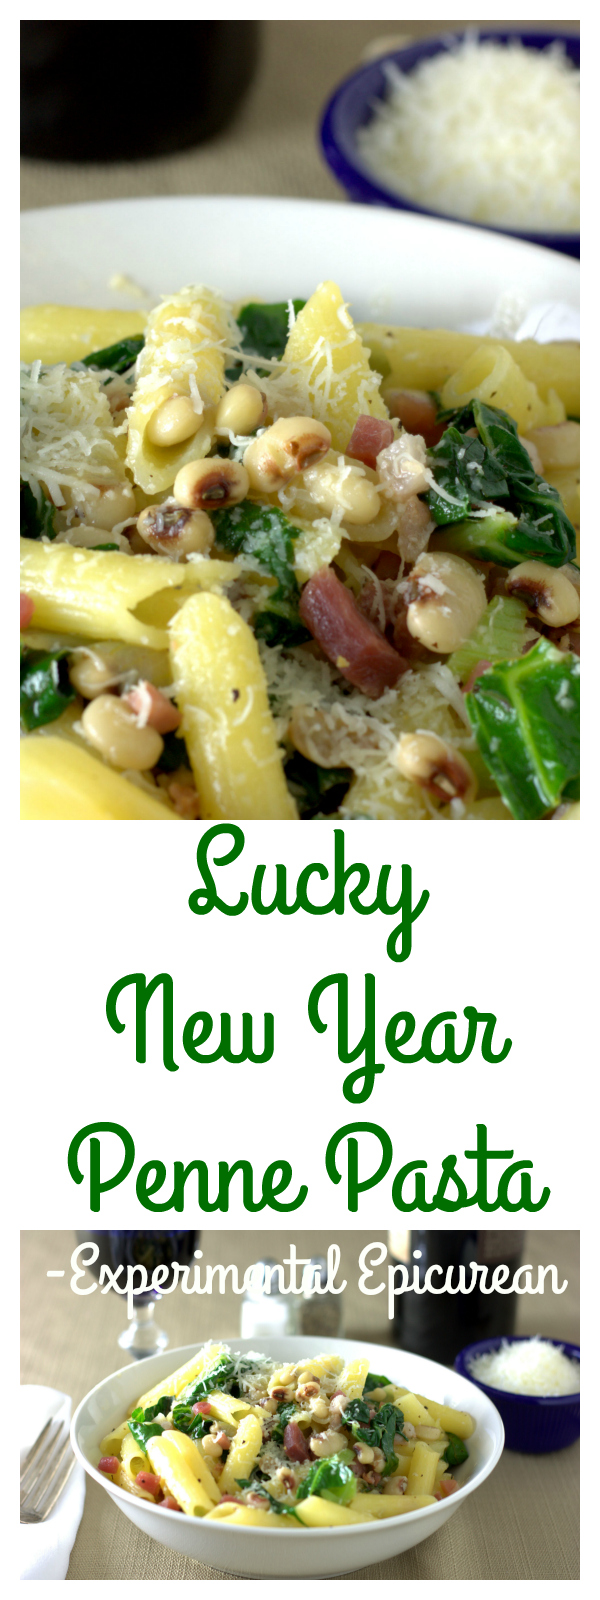 Lucky New Year Penne Pasta - Experimental Epicurean